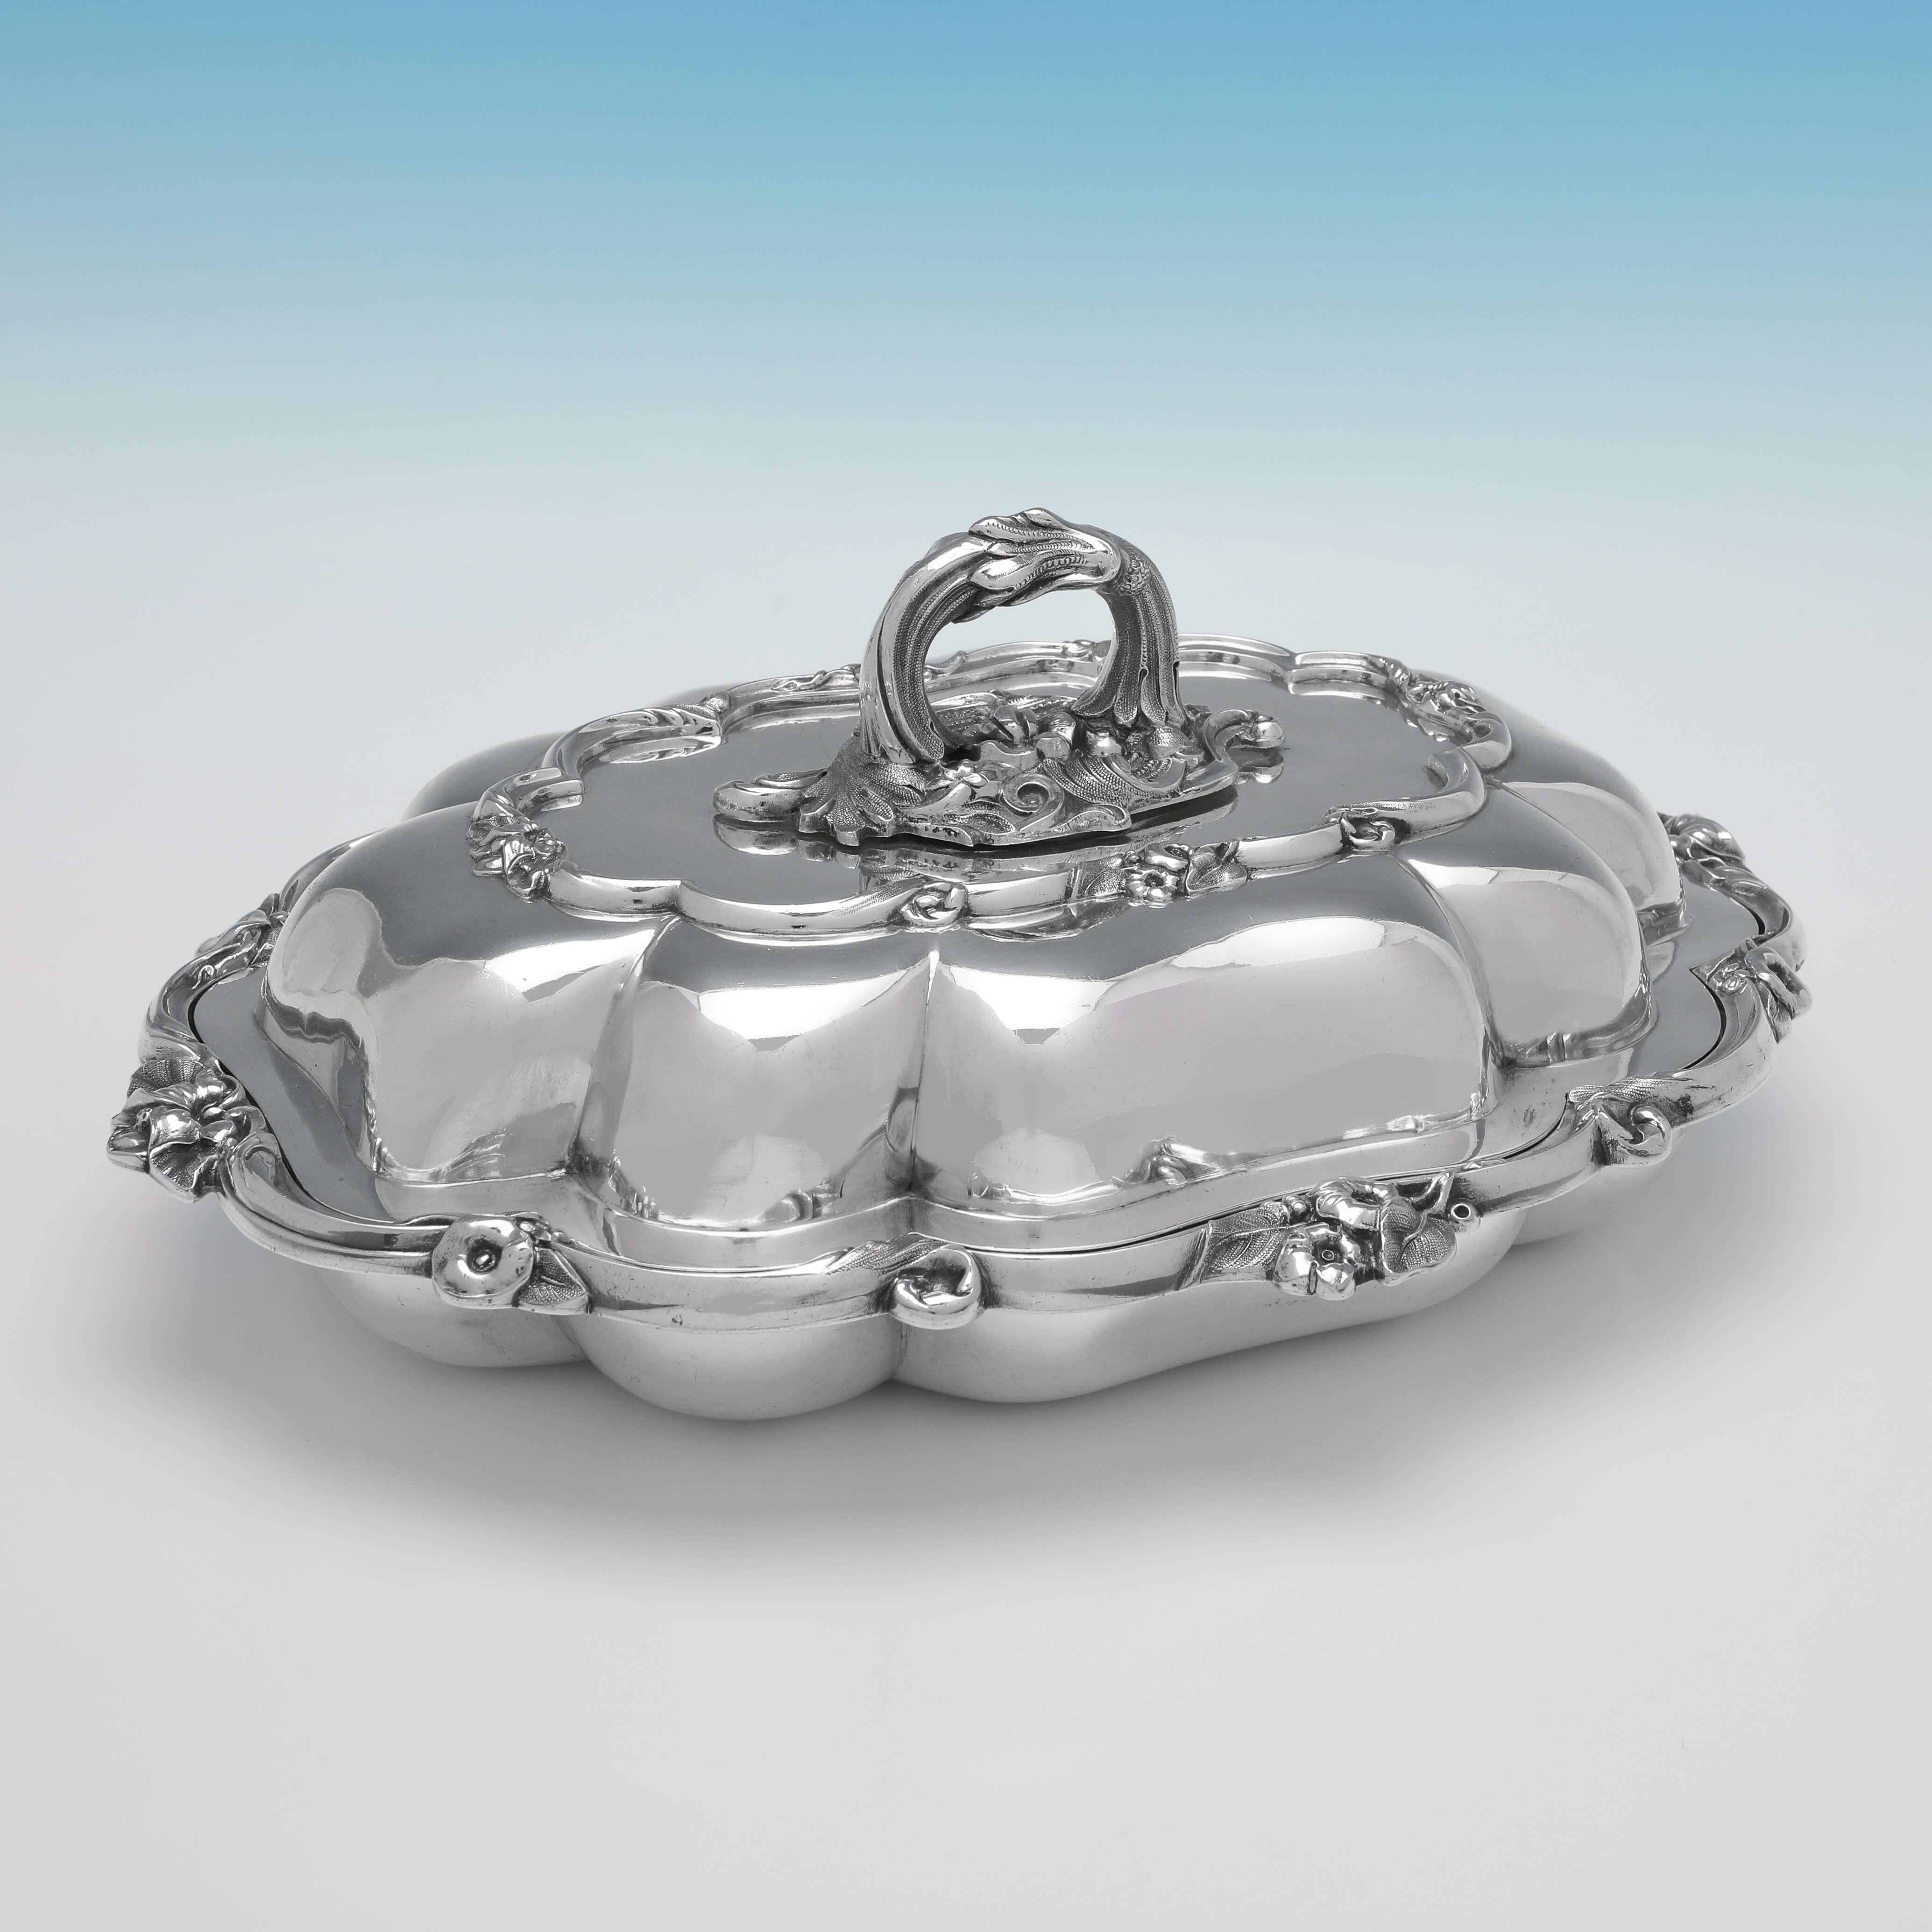 Hallmarked in London in 1841 by Joseph Angell & Son, this ornate pair of Victorian, Antique Sterling Silver Entree Dishes, feature shaped borders, with floral and scroll decoration, and removable handles. Each entree dish measures 5.5